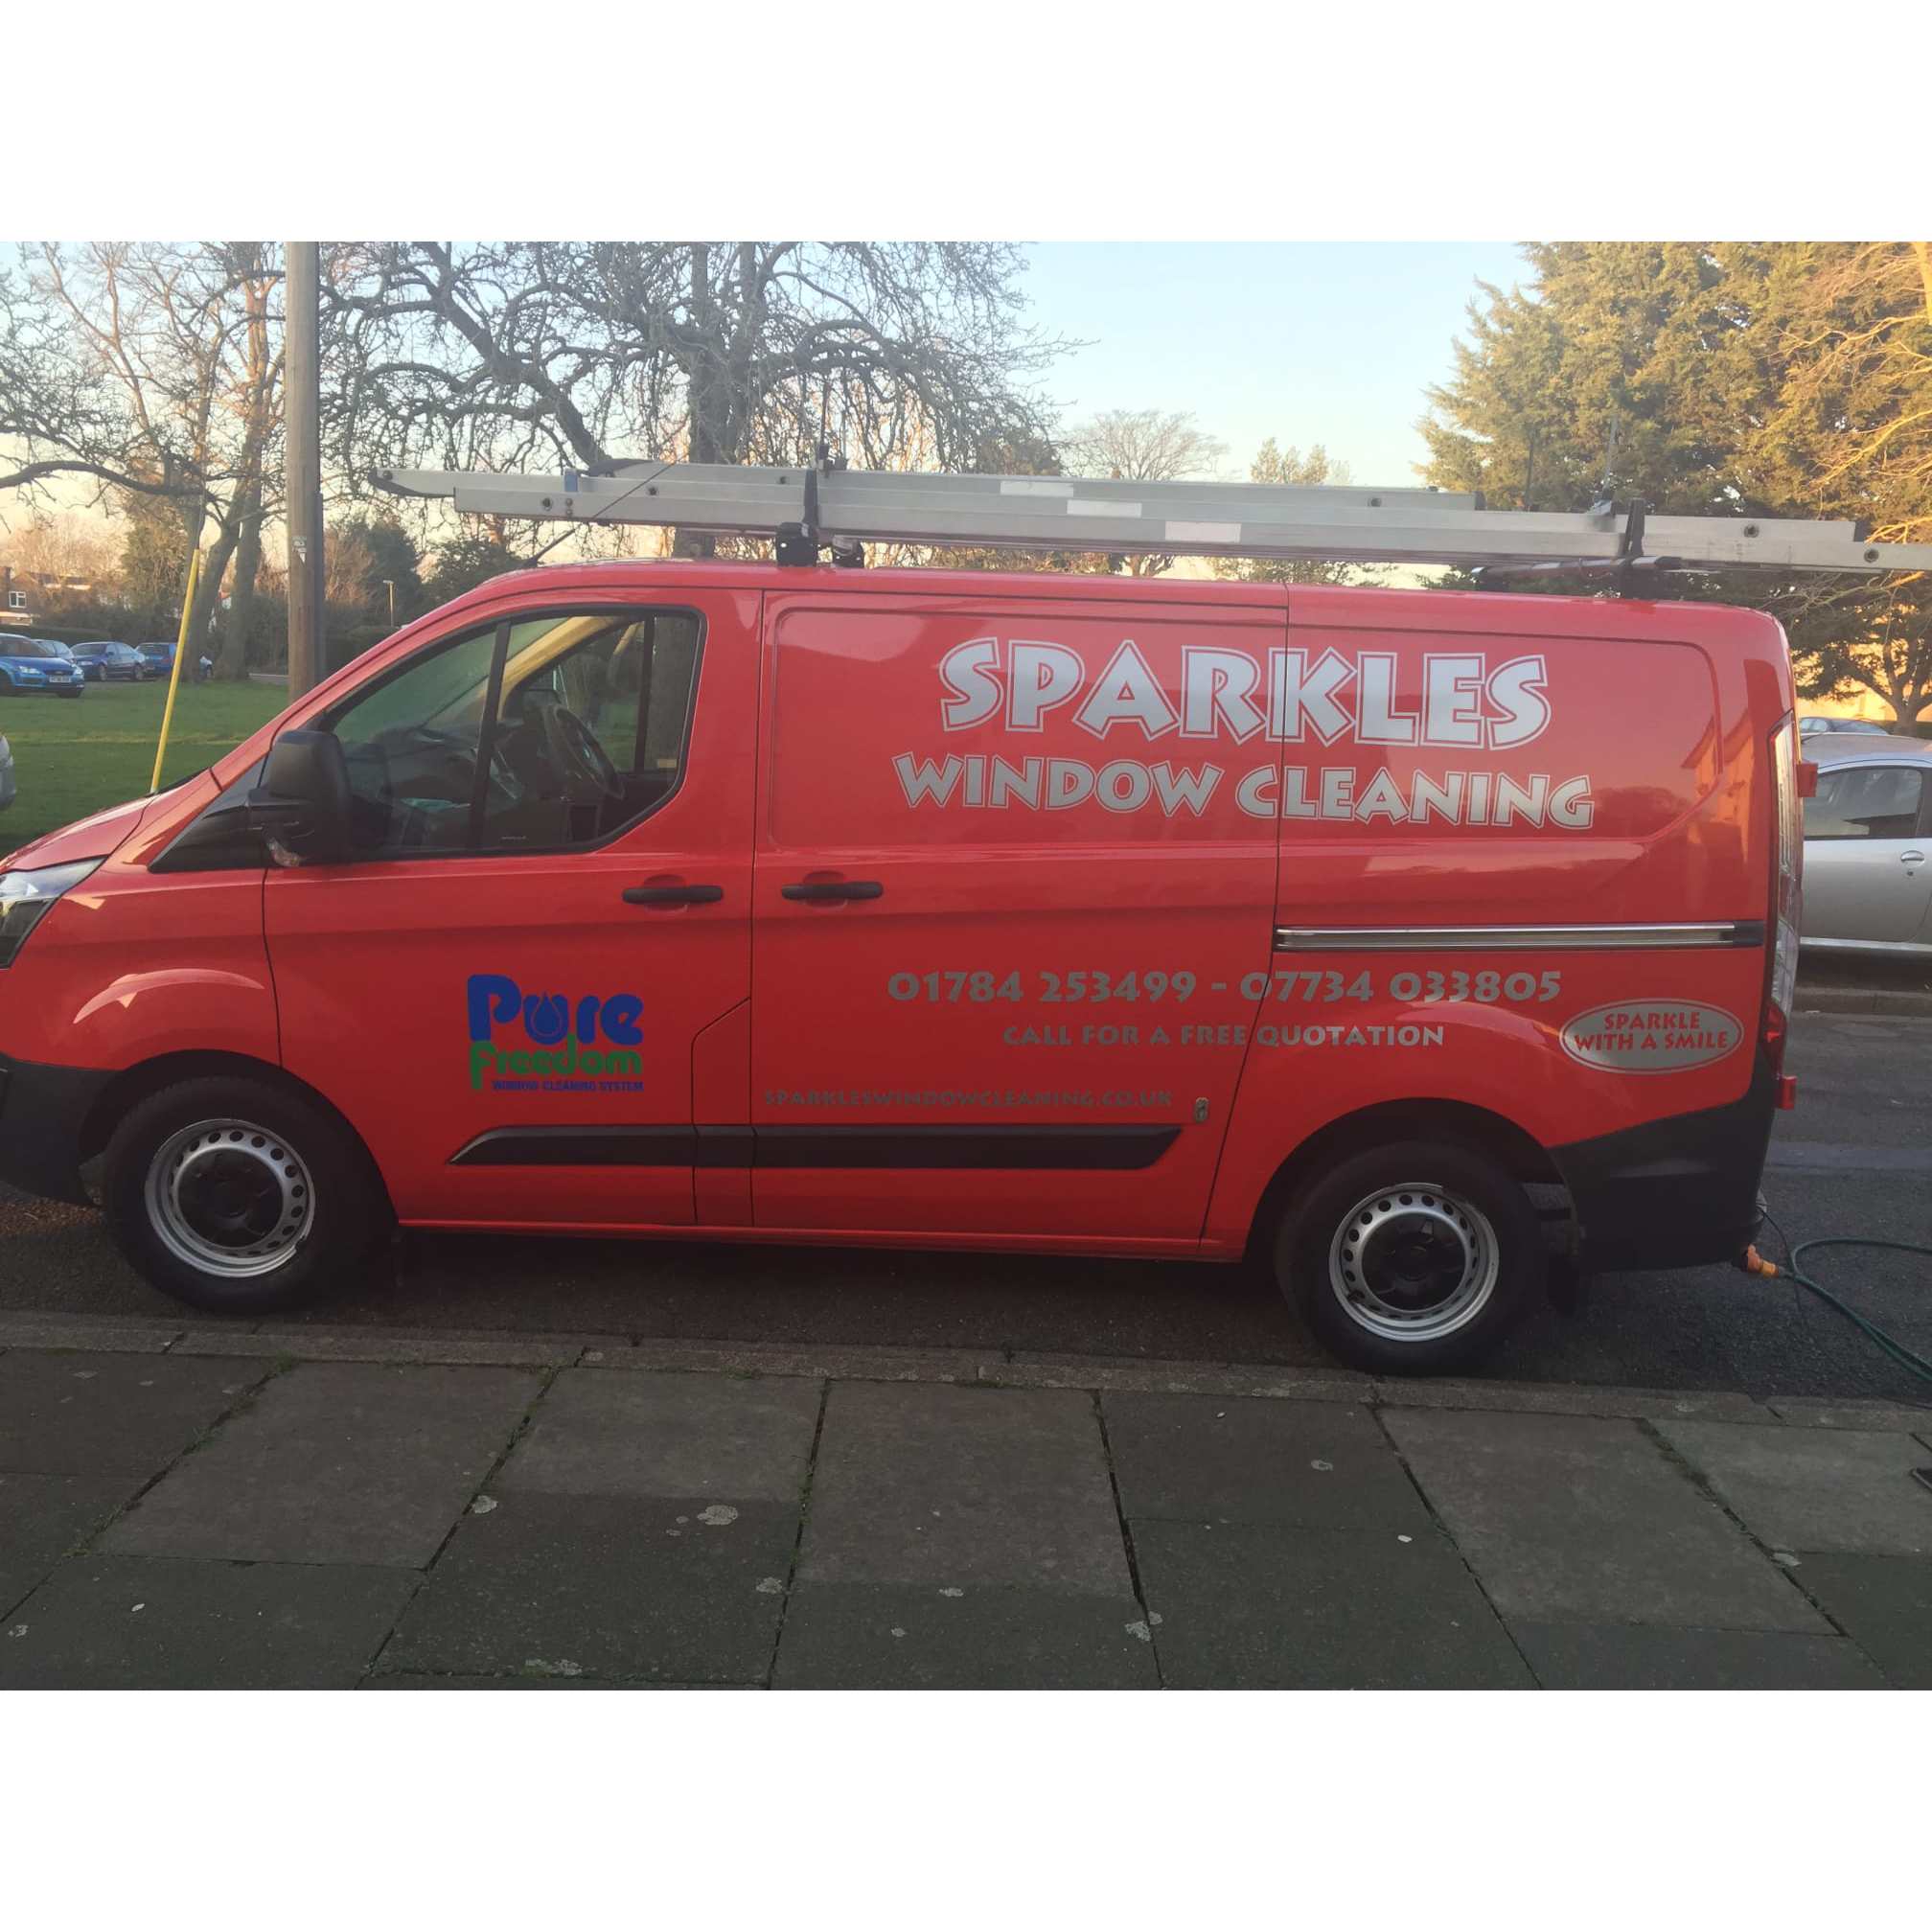 Sparkles Window Cleaning Services - Staines-Upon-Thames, Surrey TW19 7NX - 01784 253499 | ShowMeLocal.com